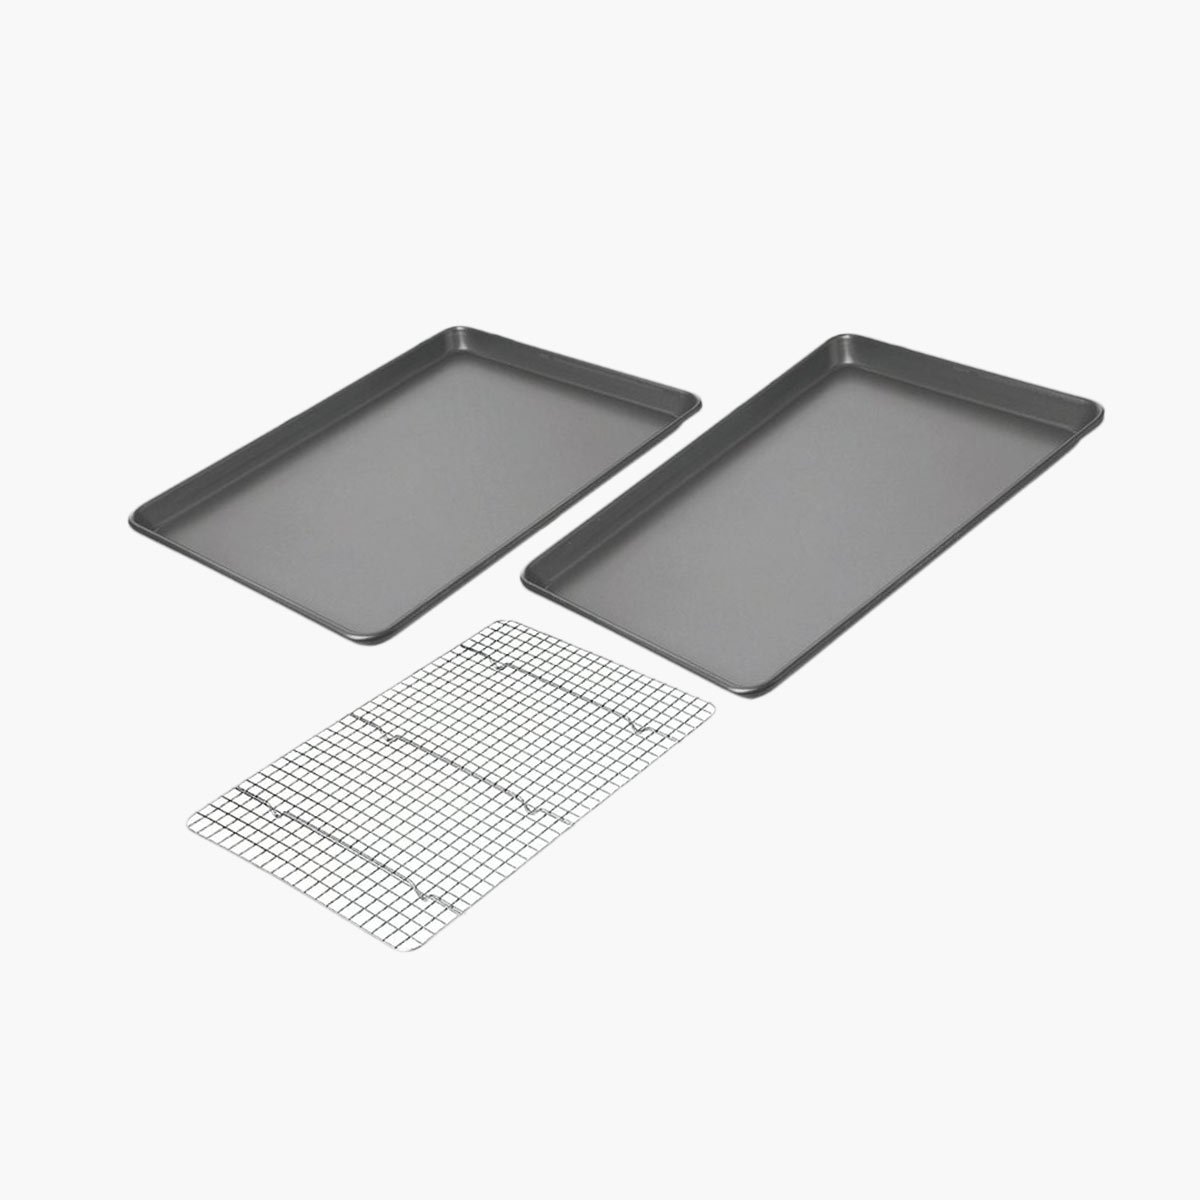 A set of two baking sheets and a wire mesh rack.